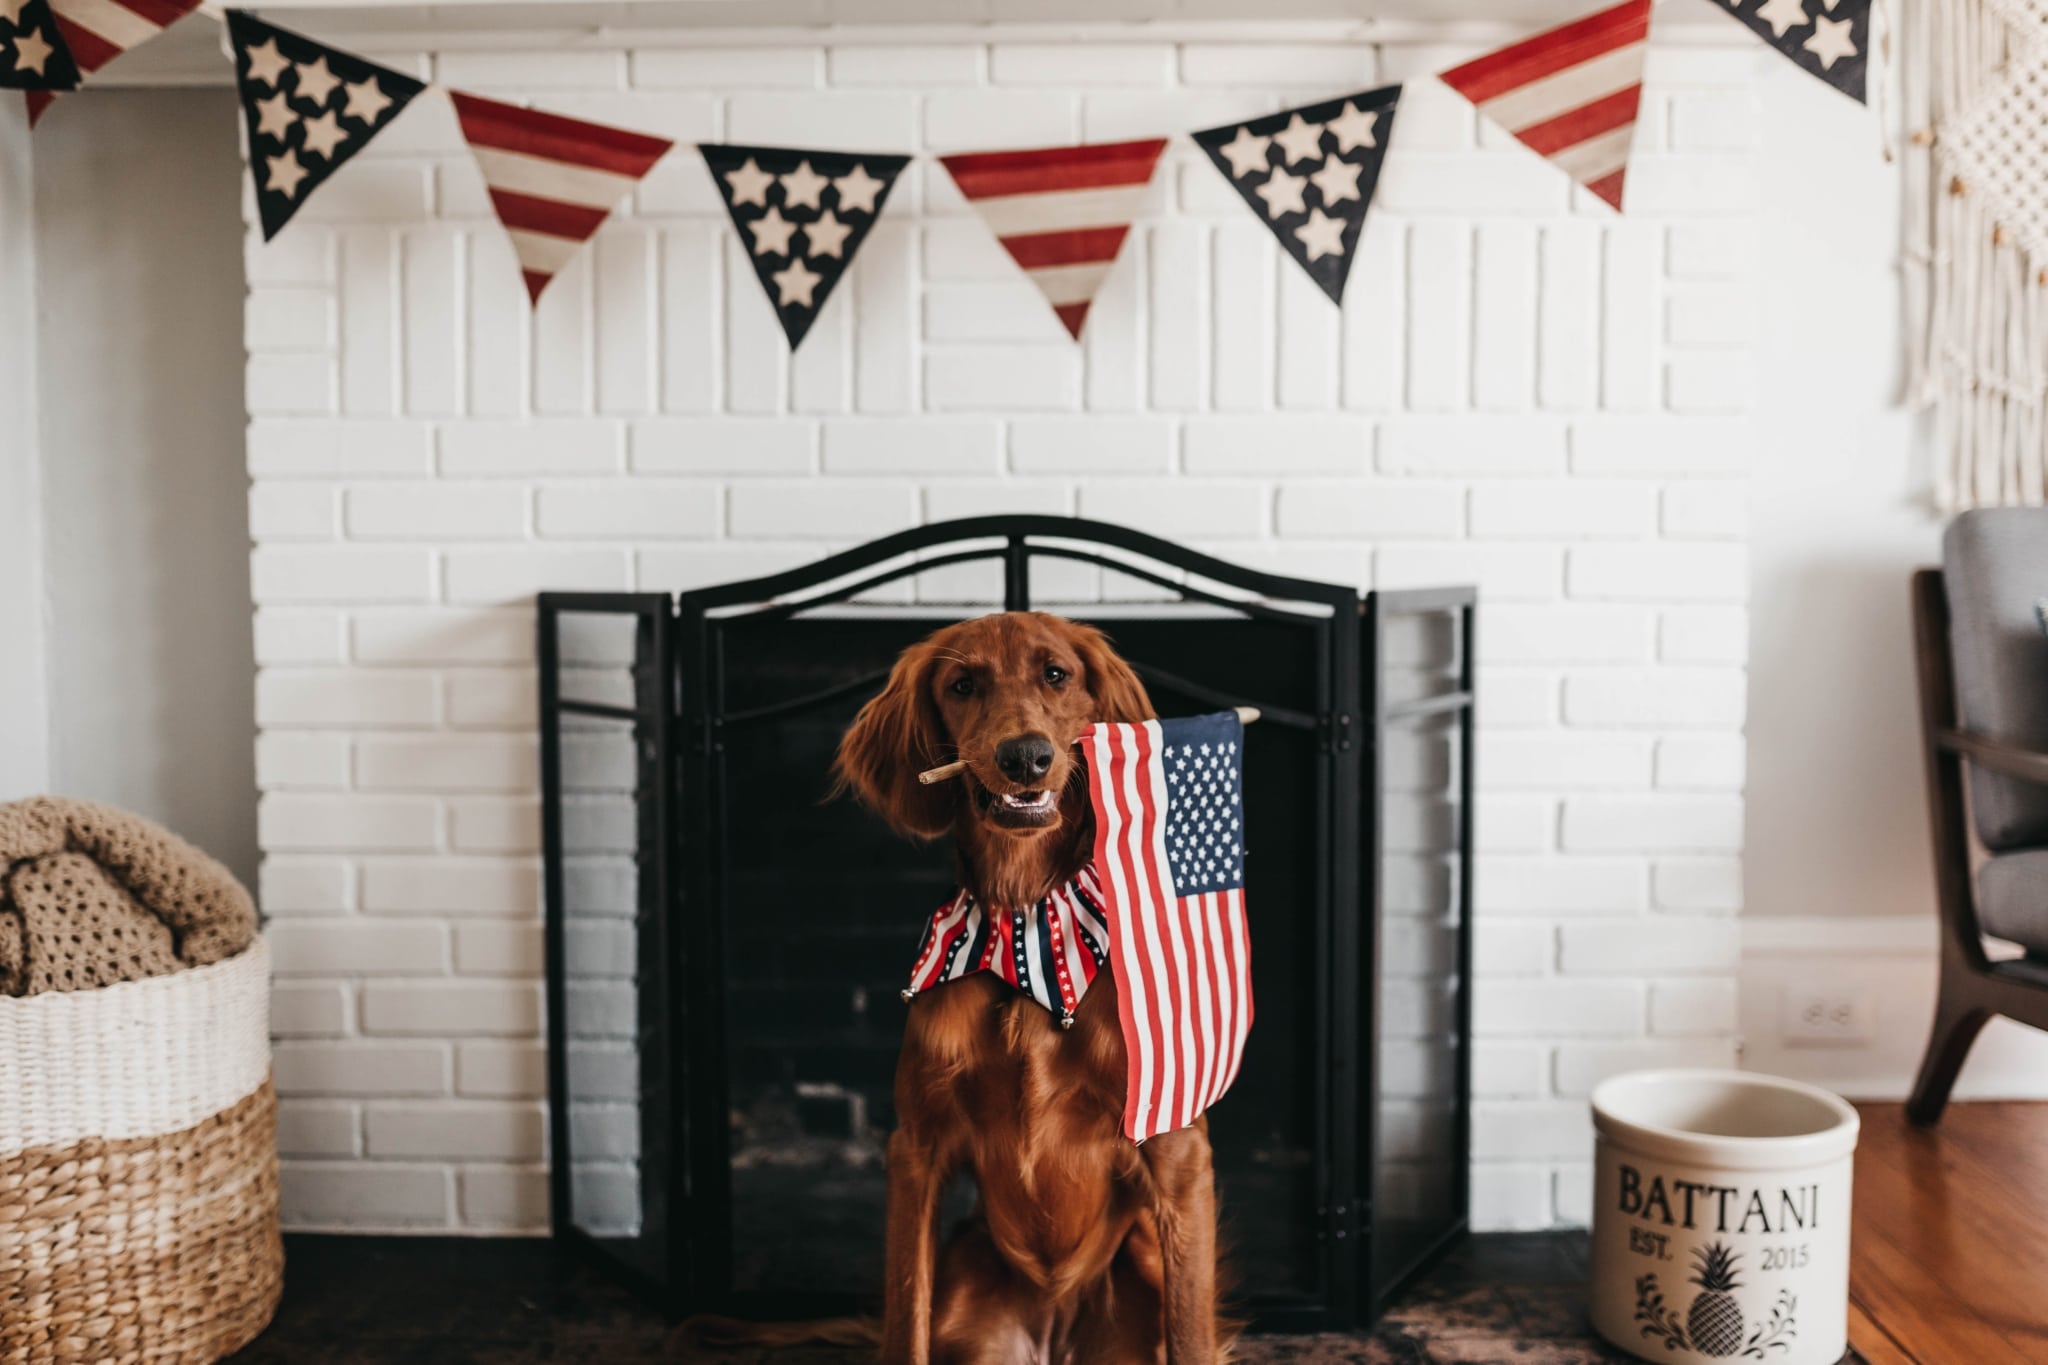 camylla battani gZltlzPun9c unsplash scaled Keeping pups calm during the fireworks + how to respond to lost pets in Birmingham